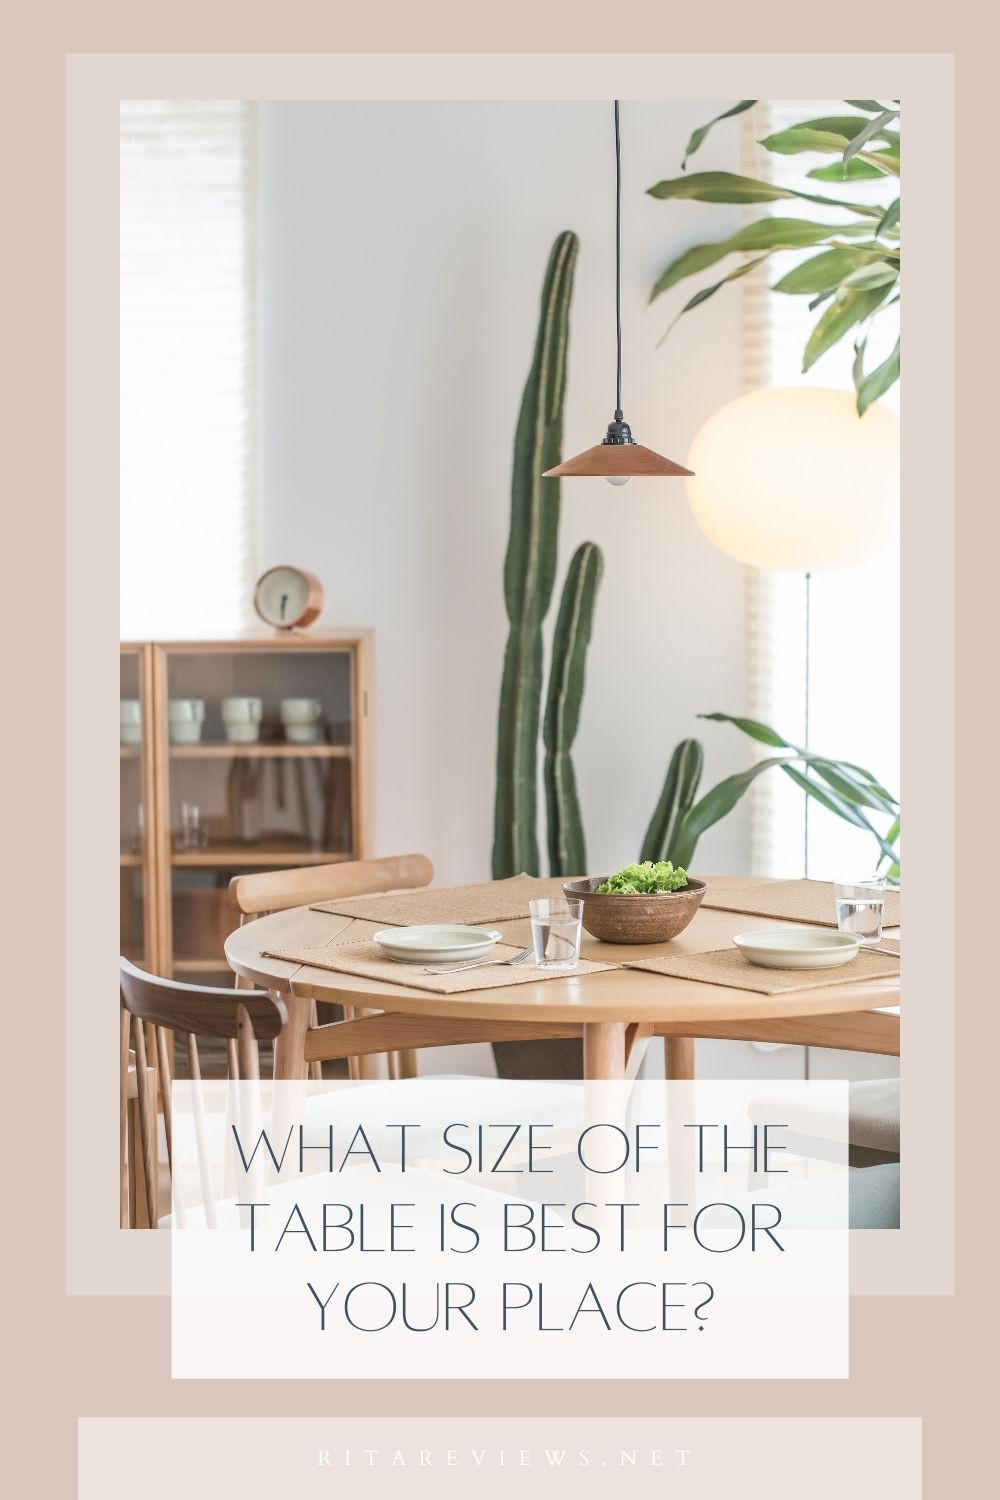 What Size of the Table is Best for Your Place